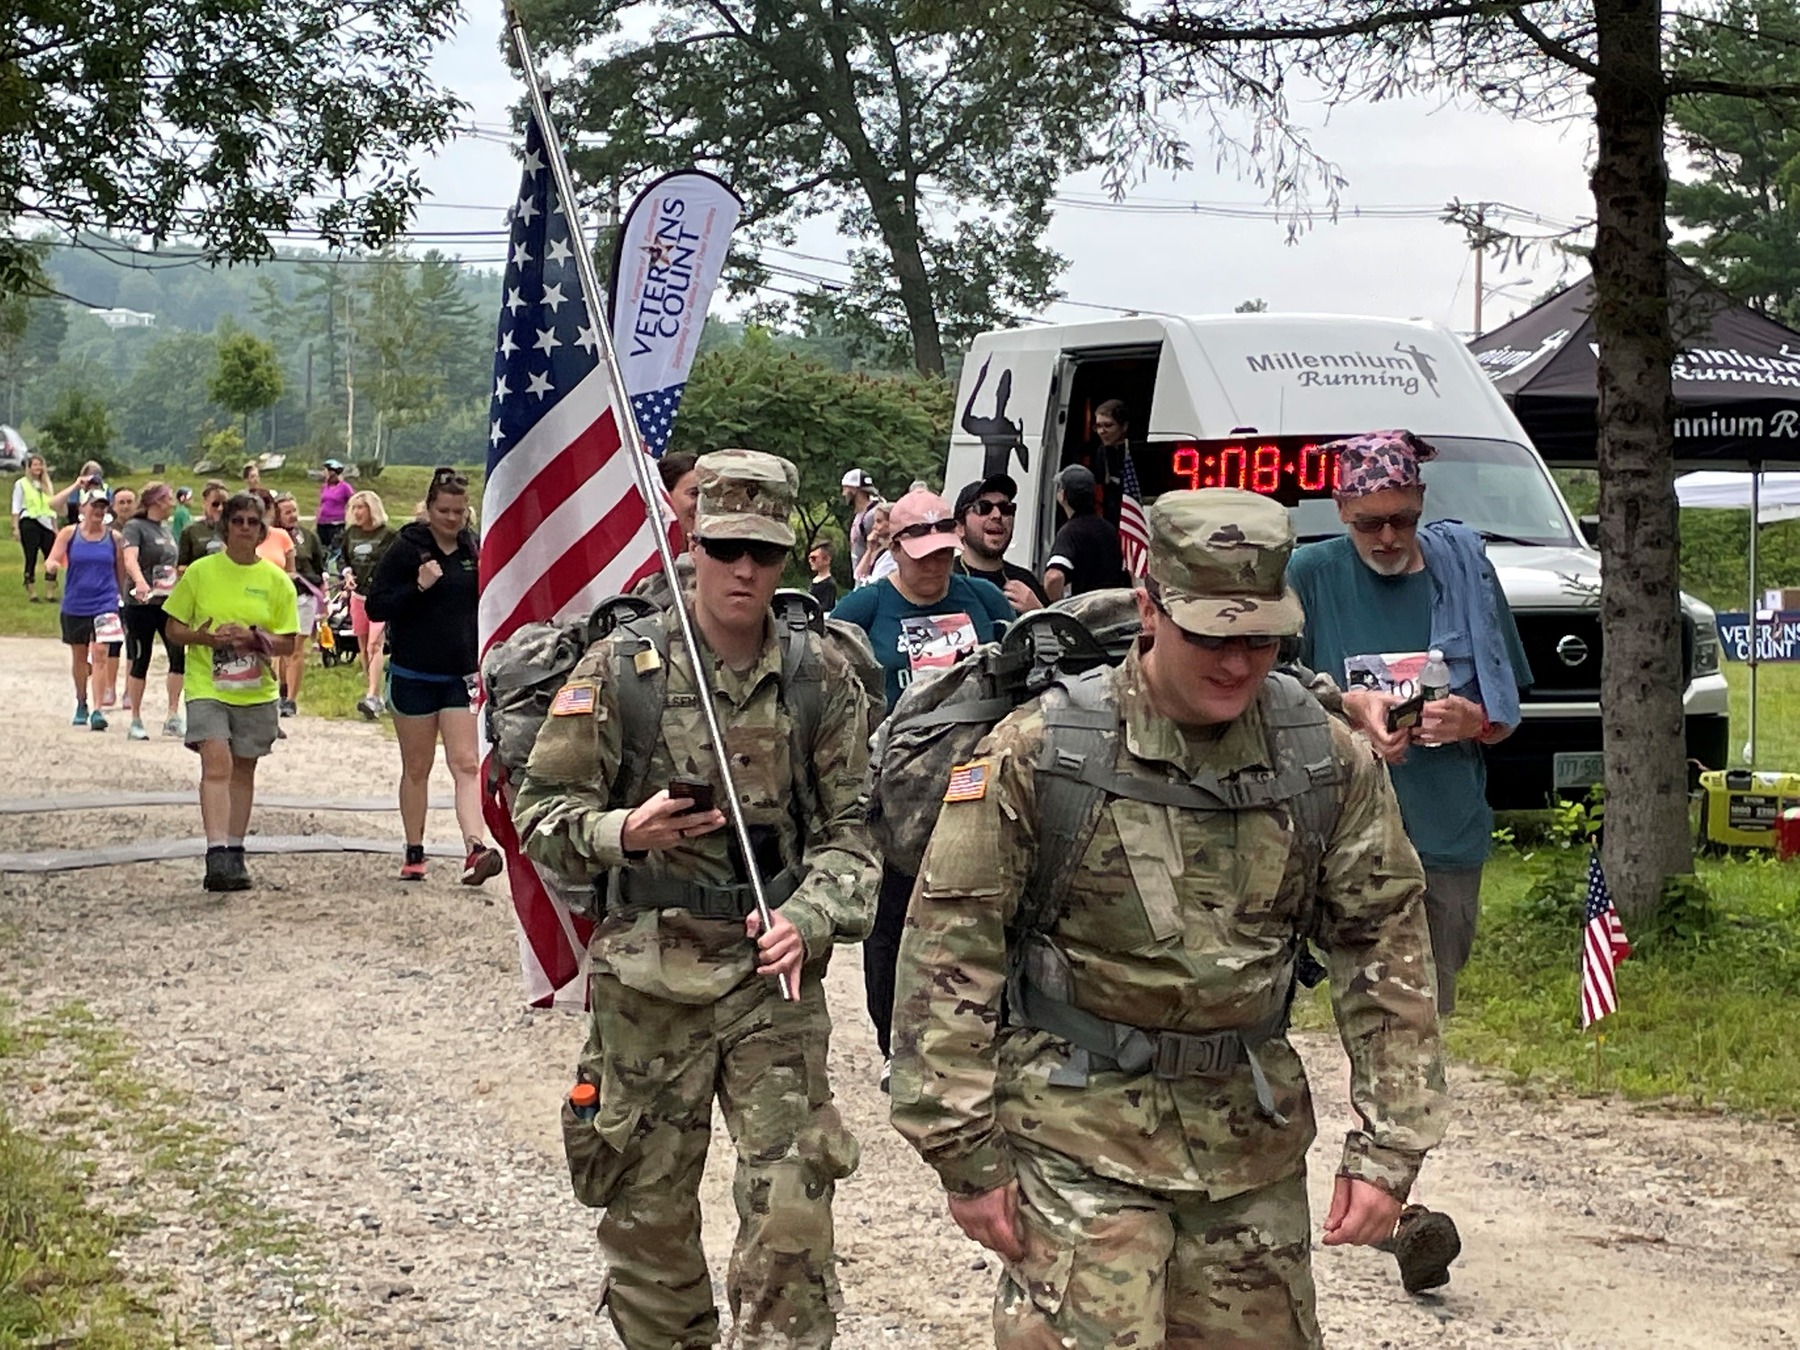 Soldiers marching at the 2022 Veterans Count Pirates Cove Event